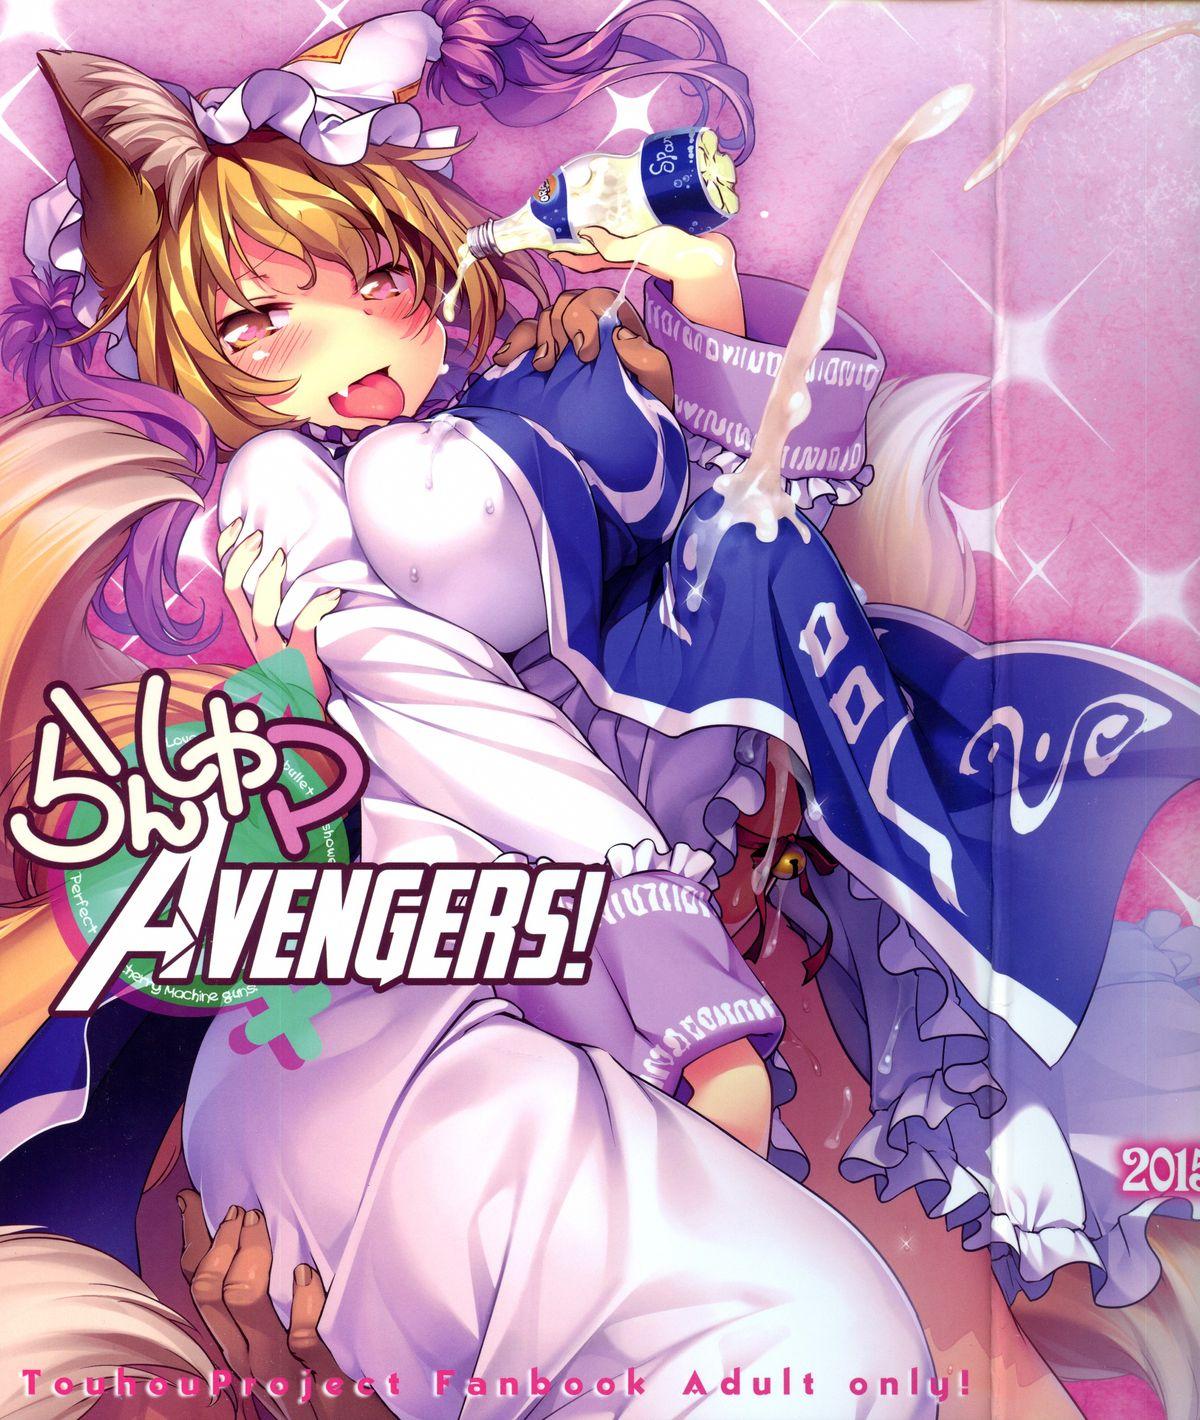 Behind Ran Shama Avengers! - Touhou project Couples - Page 1